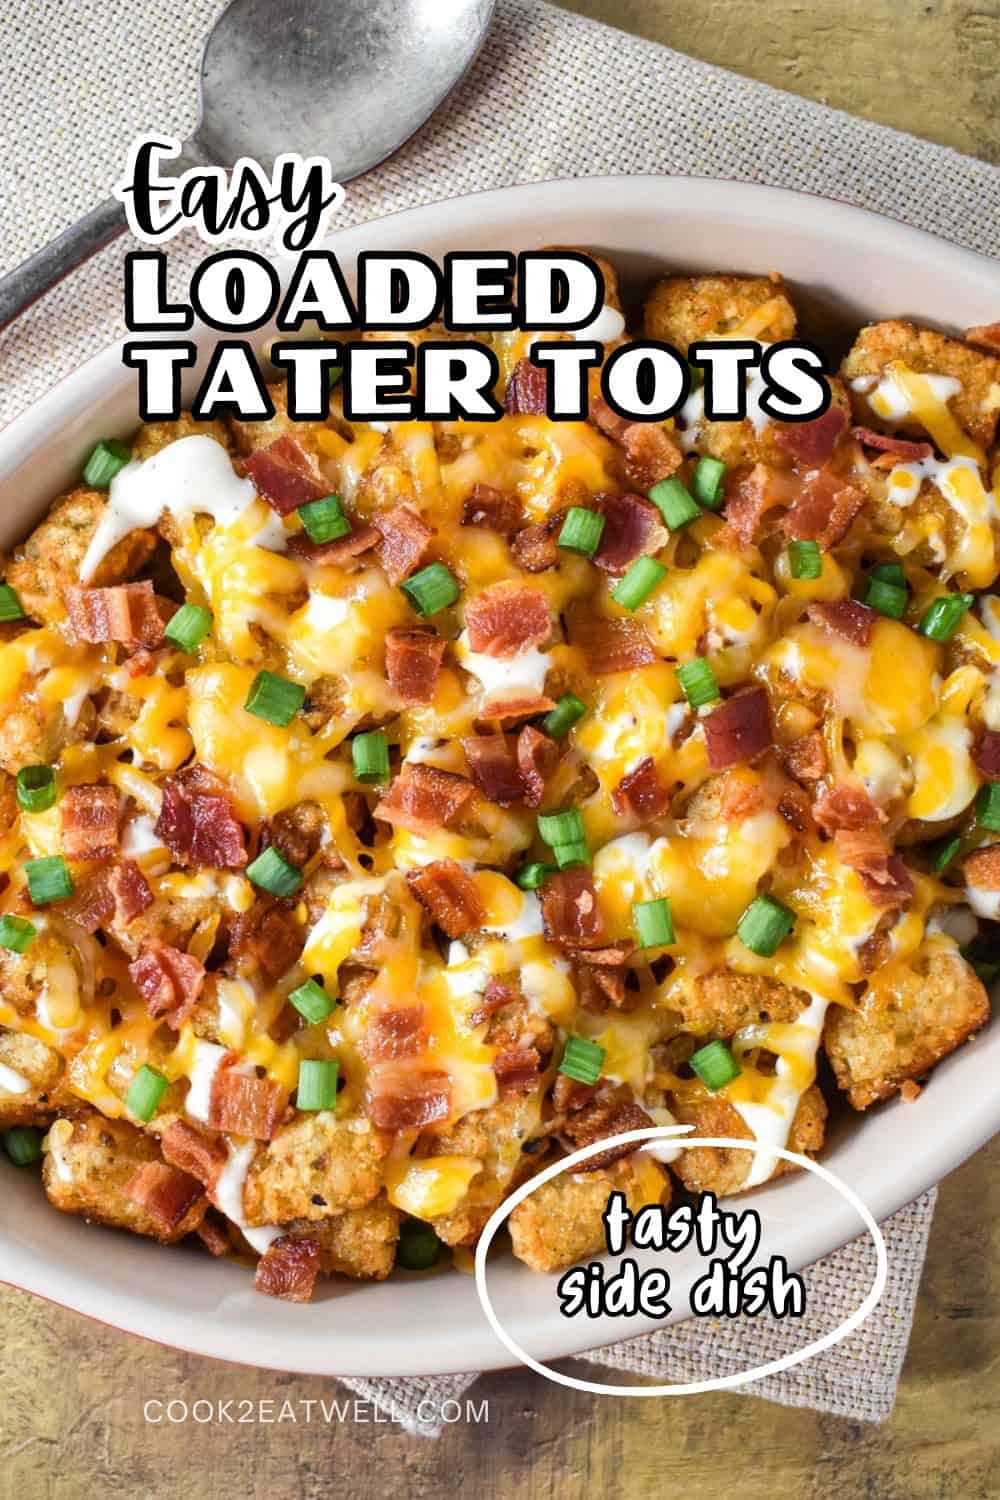 Loaded Tater Tots - Cook2eatwell